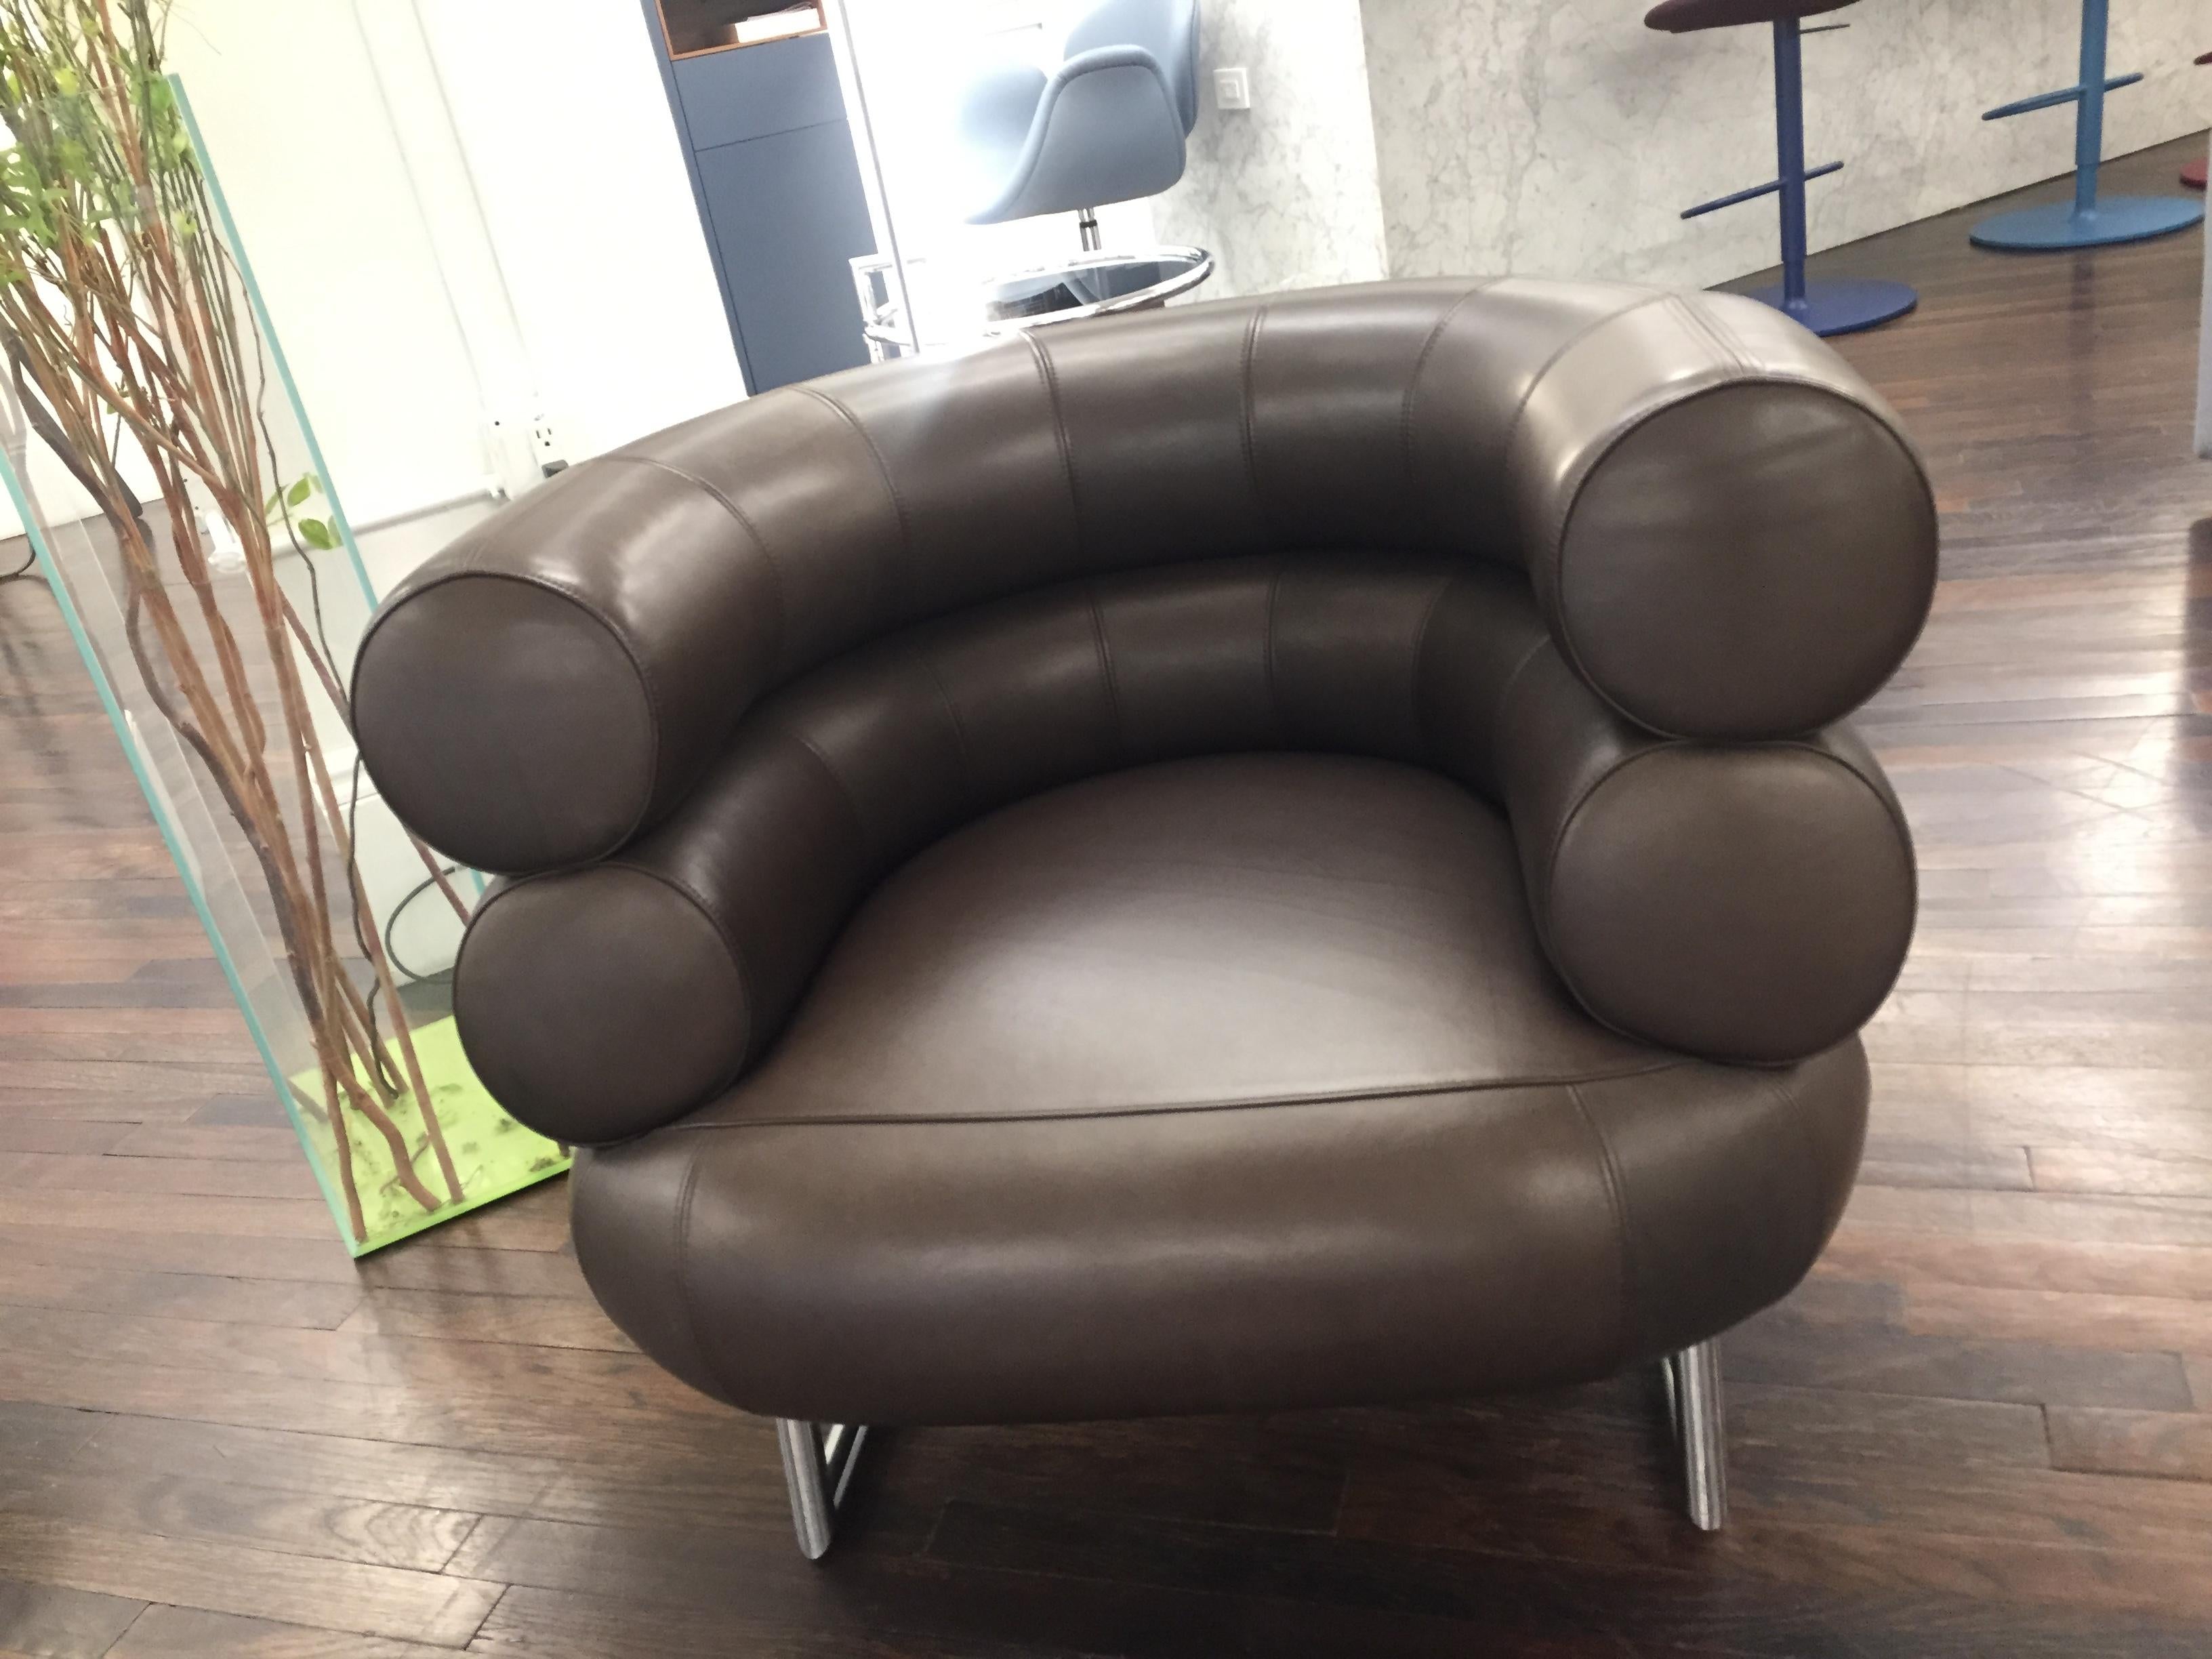 Bibendum is one of a kind. Eileen Gray underscored the character of her endearing parior lion with sly irony; she named it after the Michelin man, whose form this armchair calls to mind. Frame of chromium-plated steel tubing. Seat has a beech frame